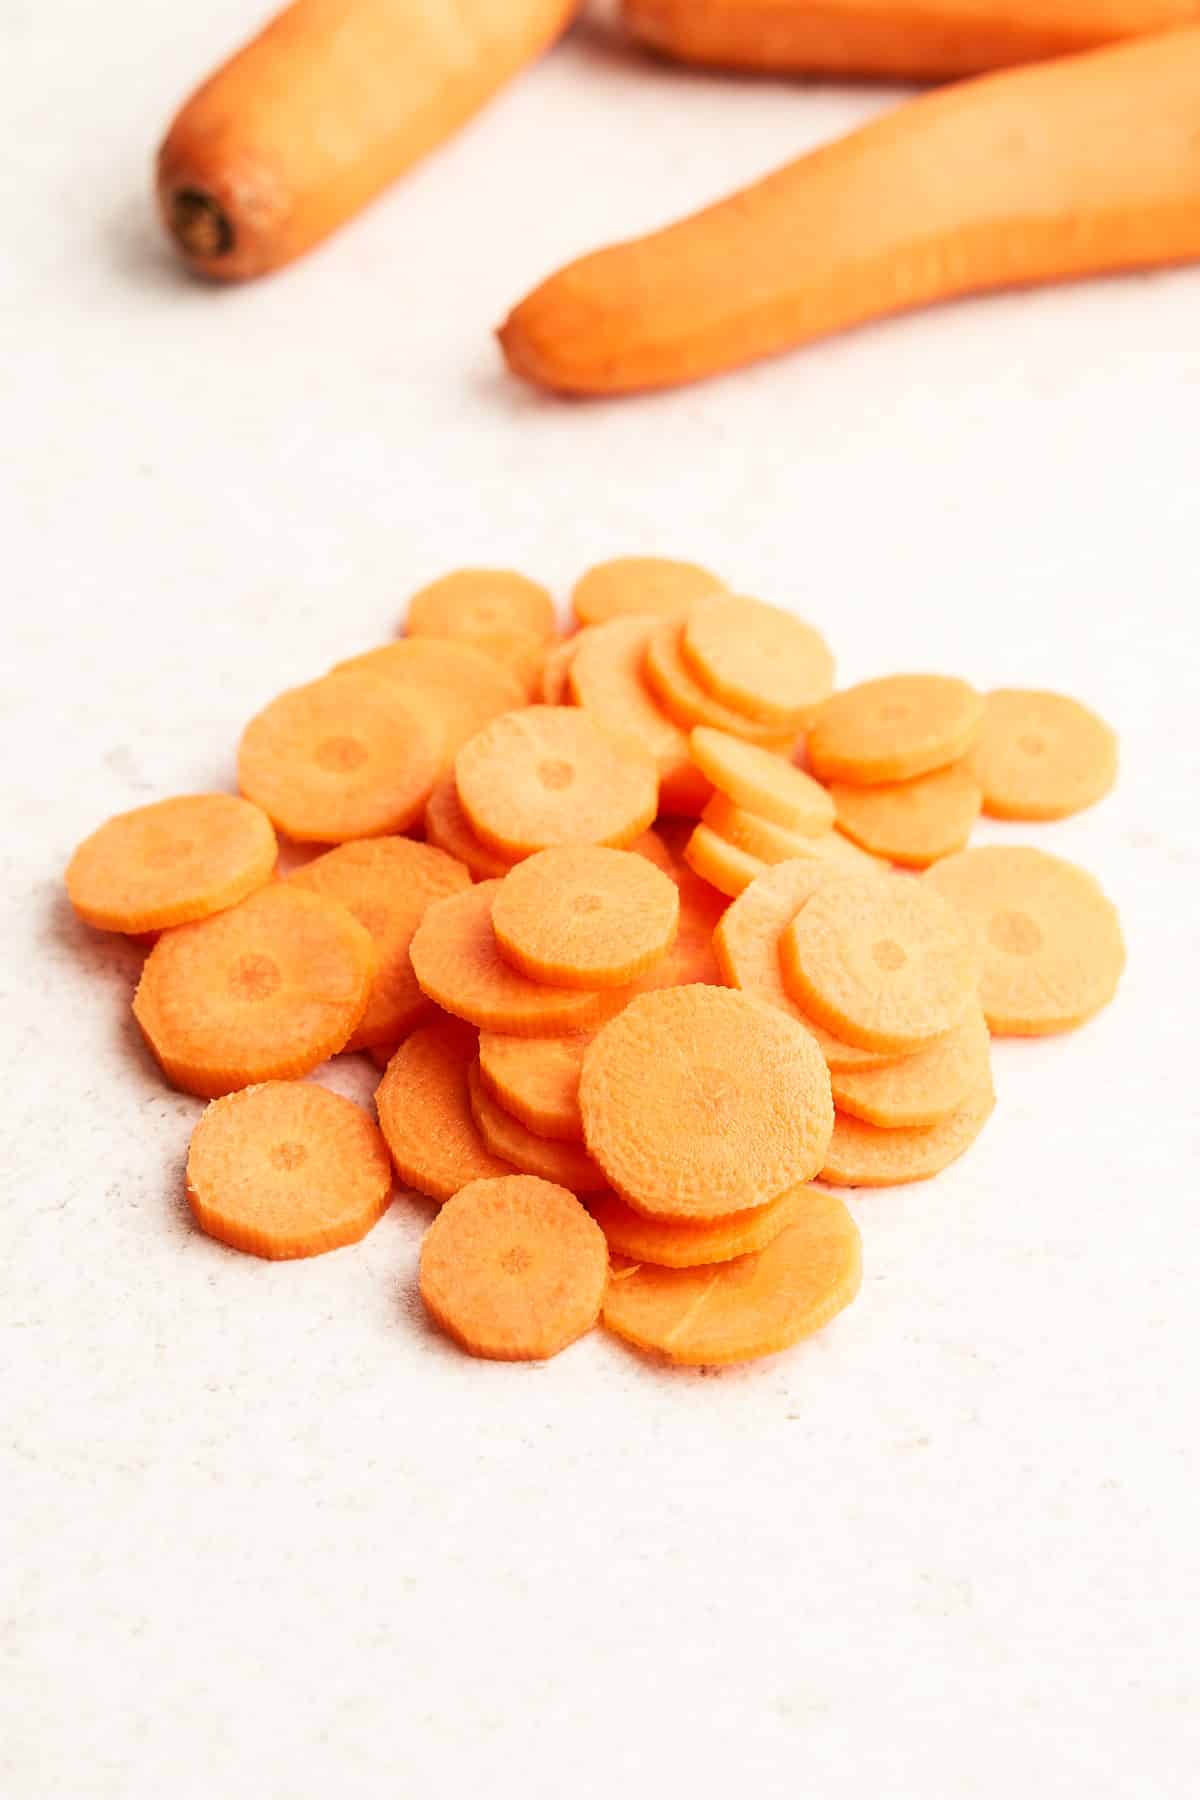 Carrot rounds.